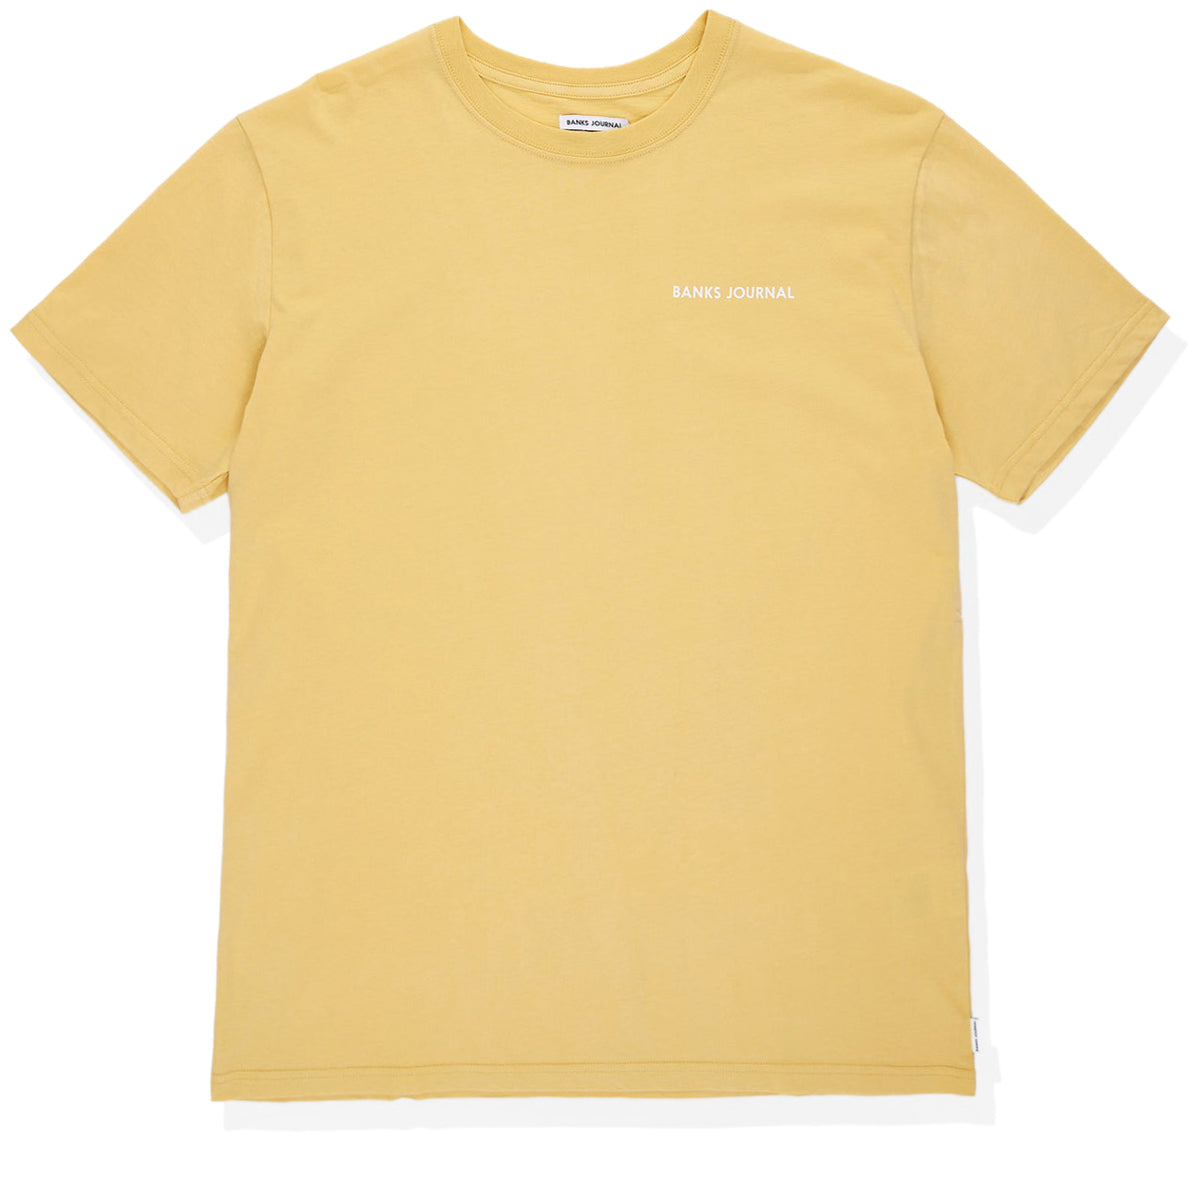 Banks Journal Label Classic T-Shirt - Yellow Tail image 1